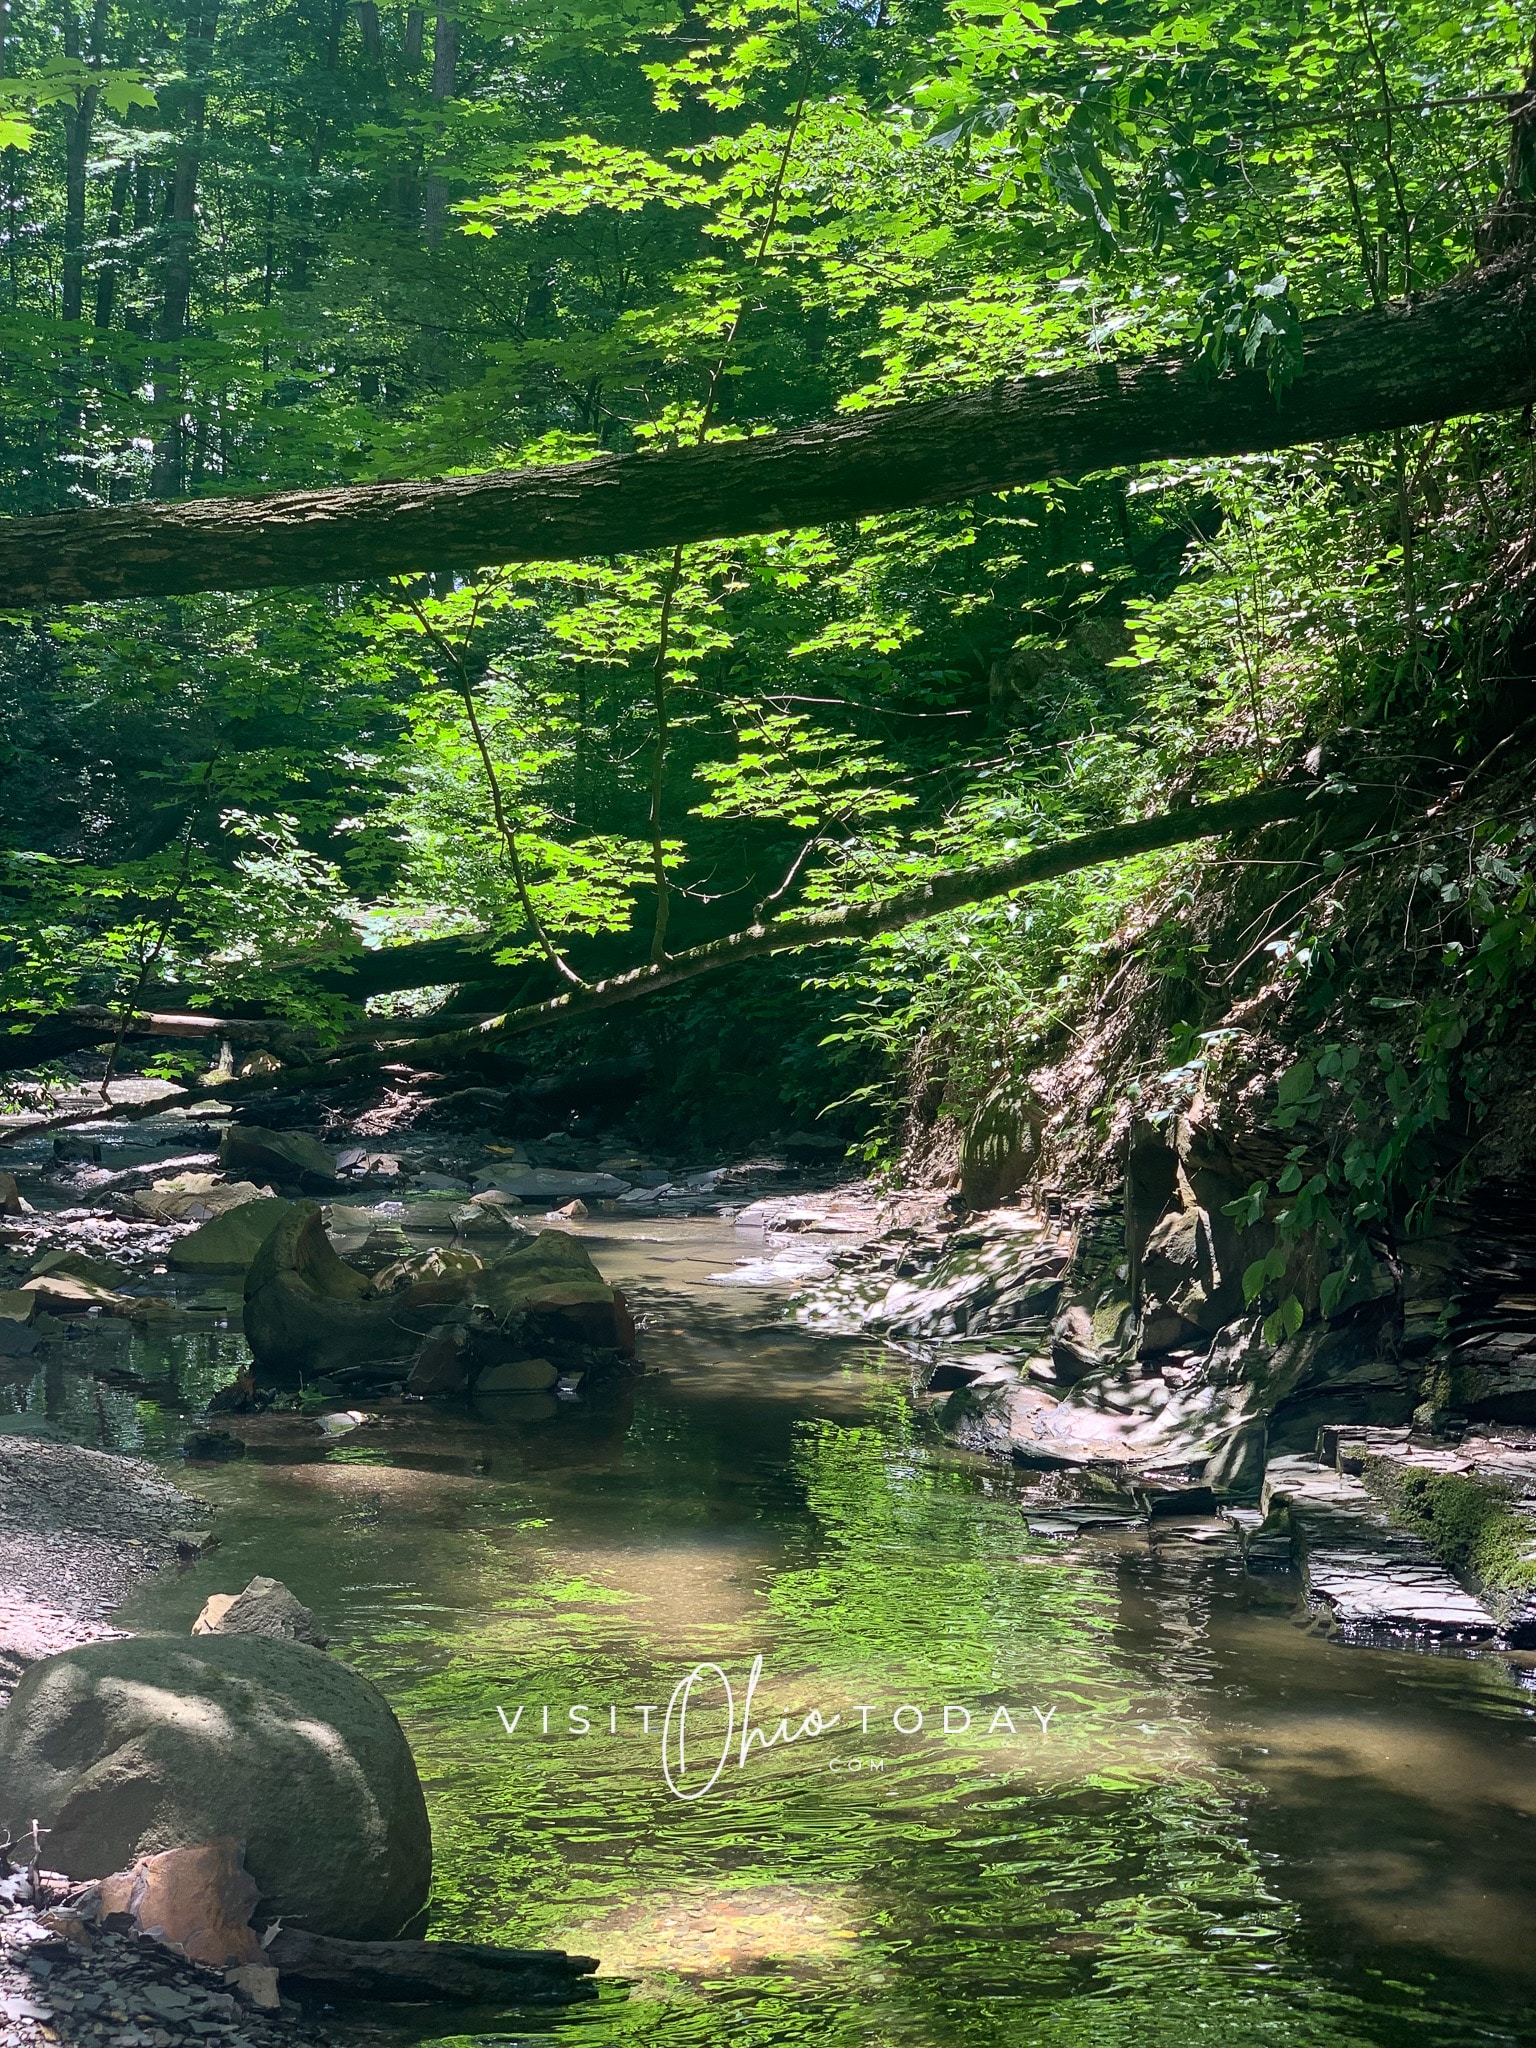 vertical photo showing a shallow part of the river with shale rock formations either side and trees with branches hanging over the water